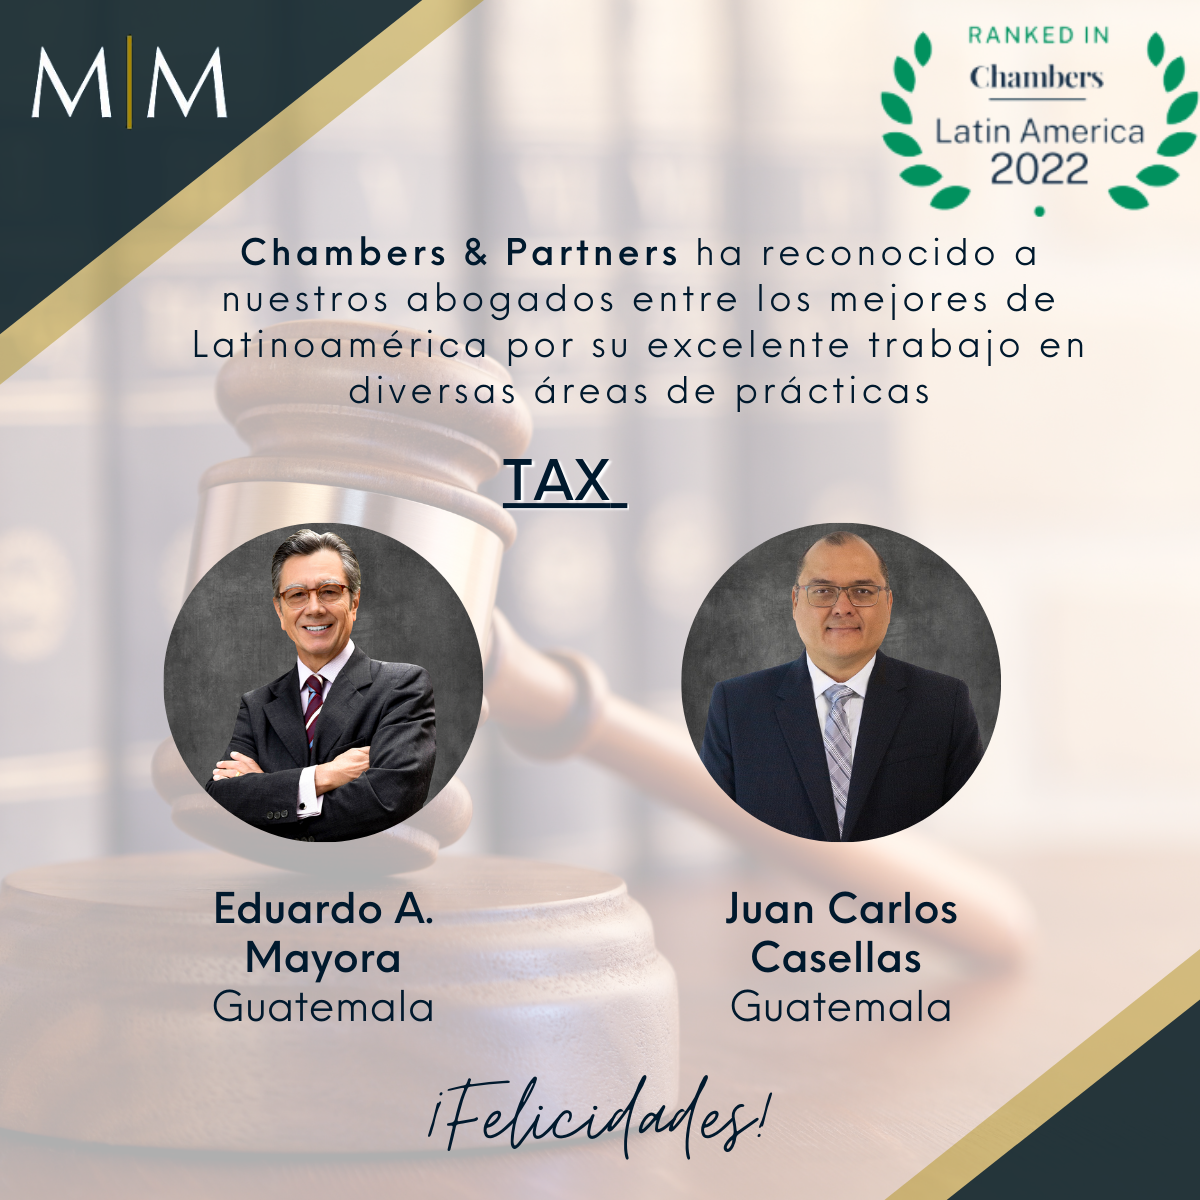 You are currently viewing M&M Recognition- Chambers & Partners “Tax”